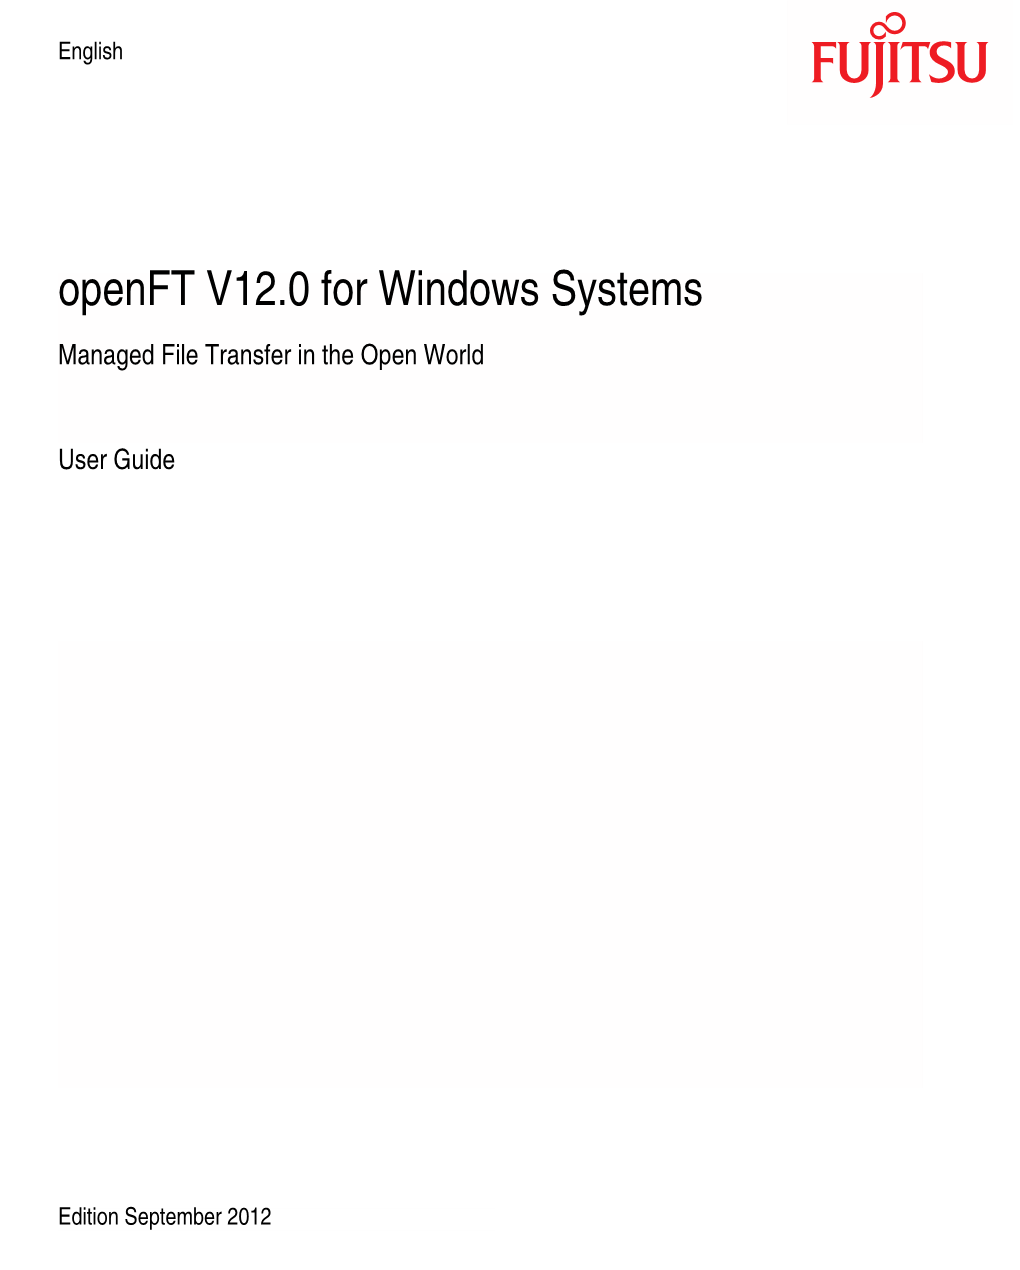 Openft V12.0 for Windows Systems Managed File Transfer in the Open World